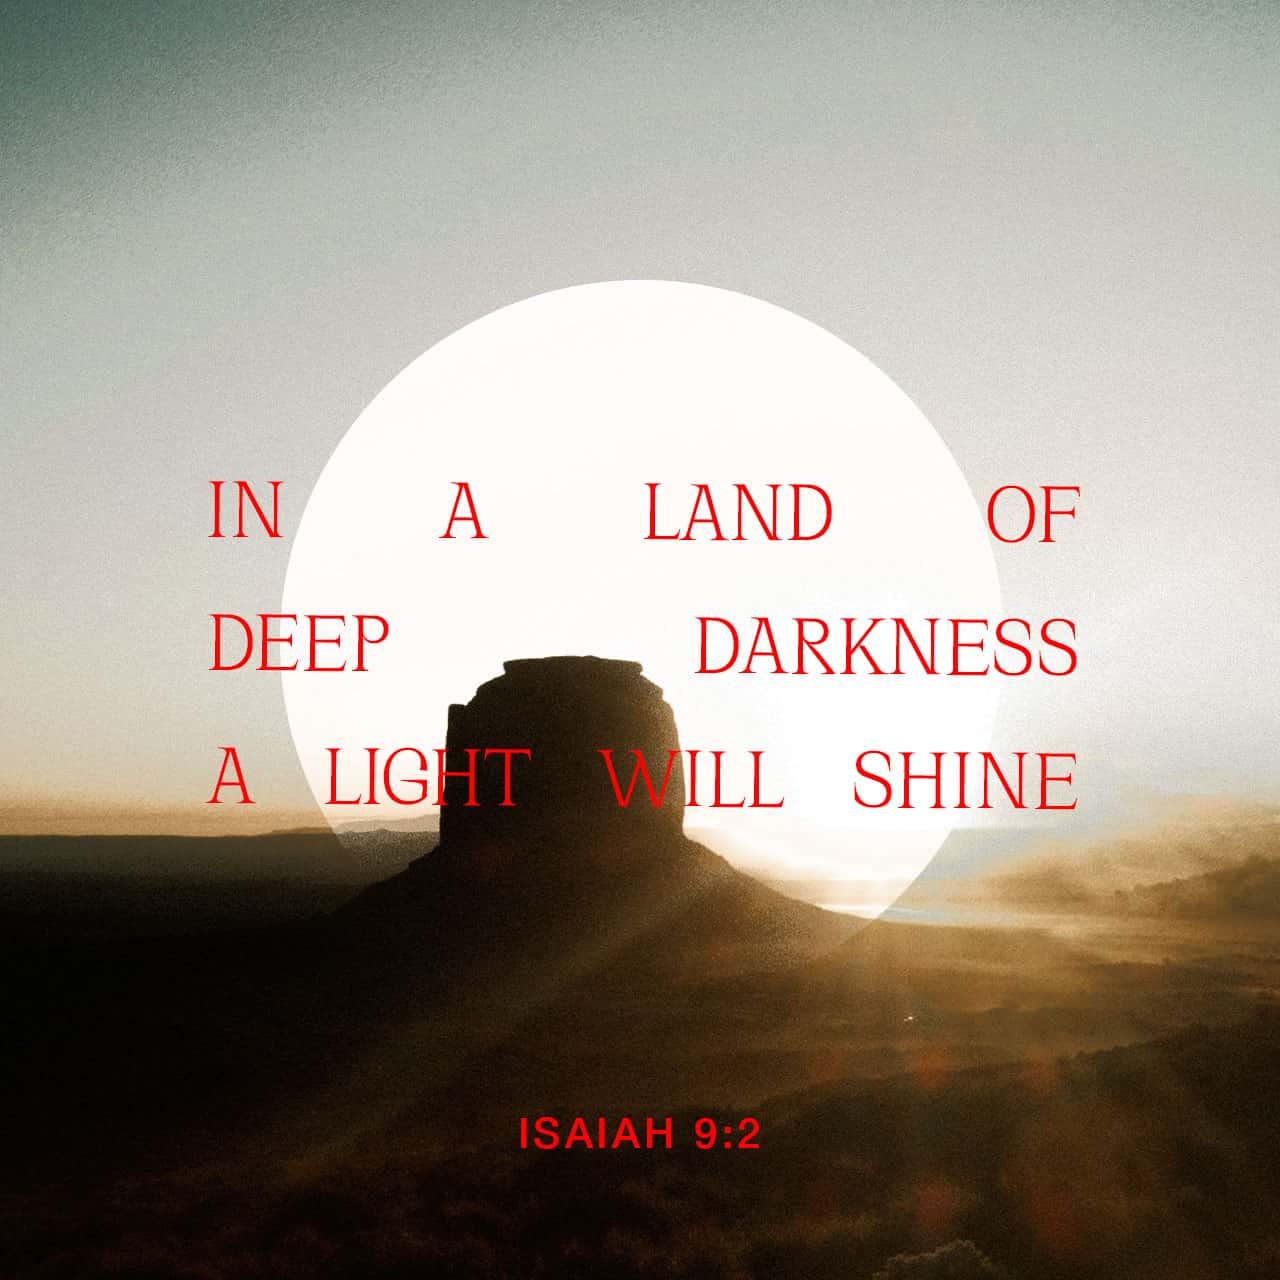 Bible Verse of the Day - day 83 - image 67214 (Isaiah 9:1-7)